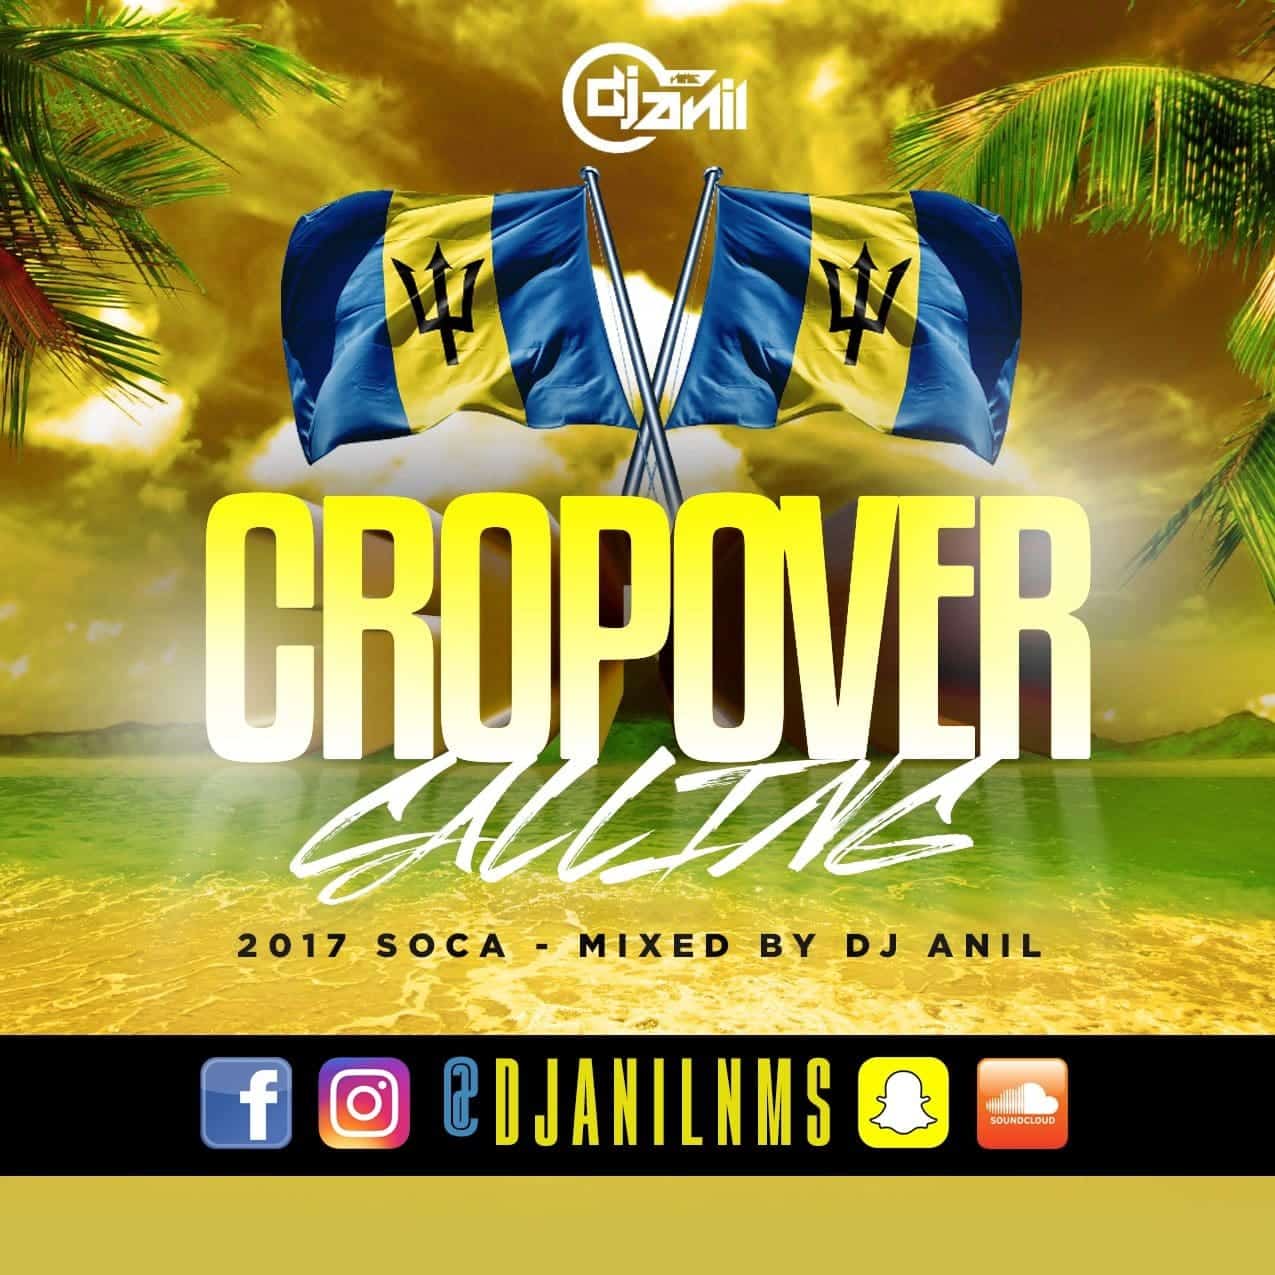 Dj Anil NMS Cropover Calling 2017